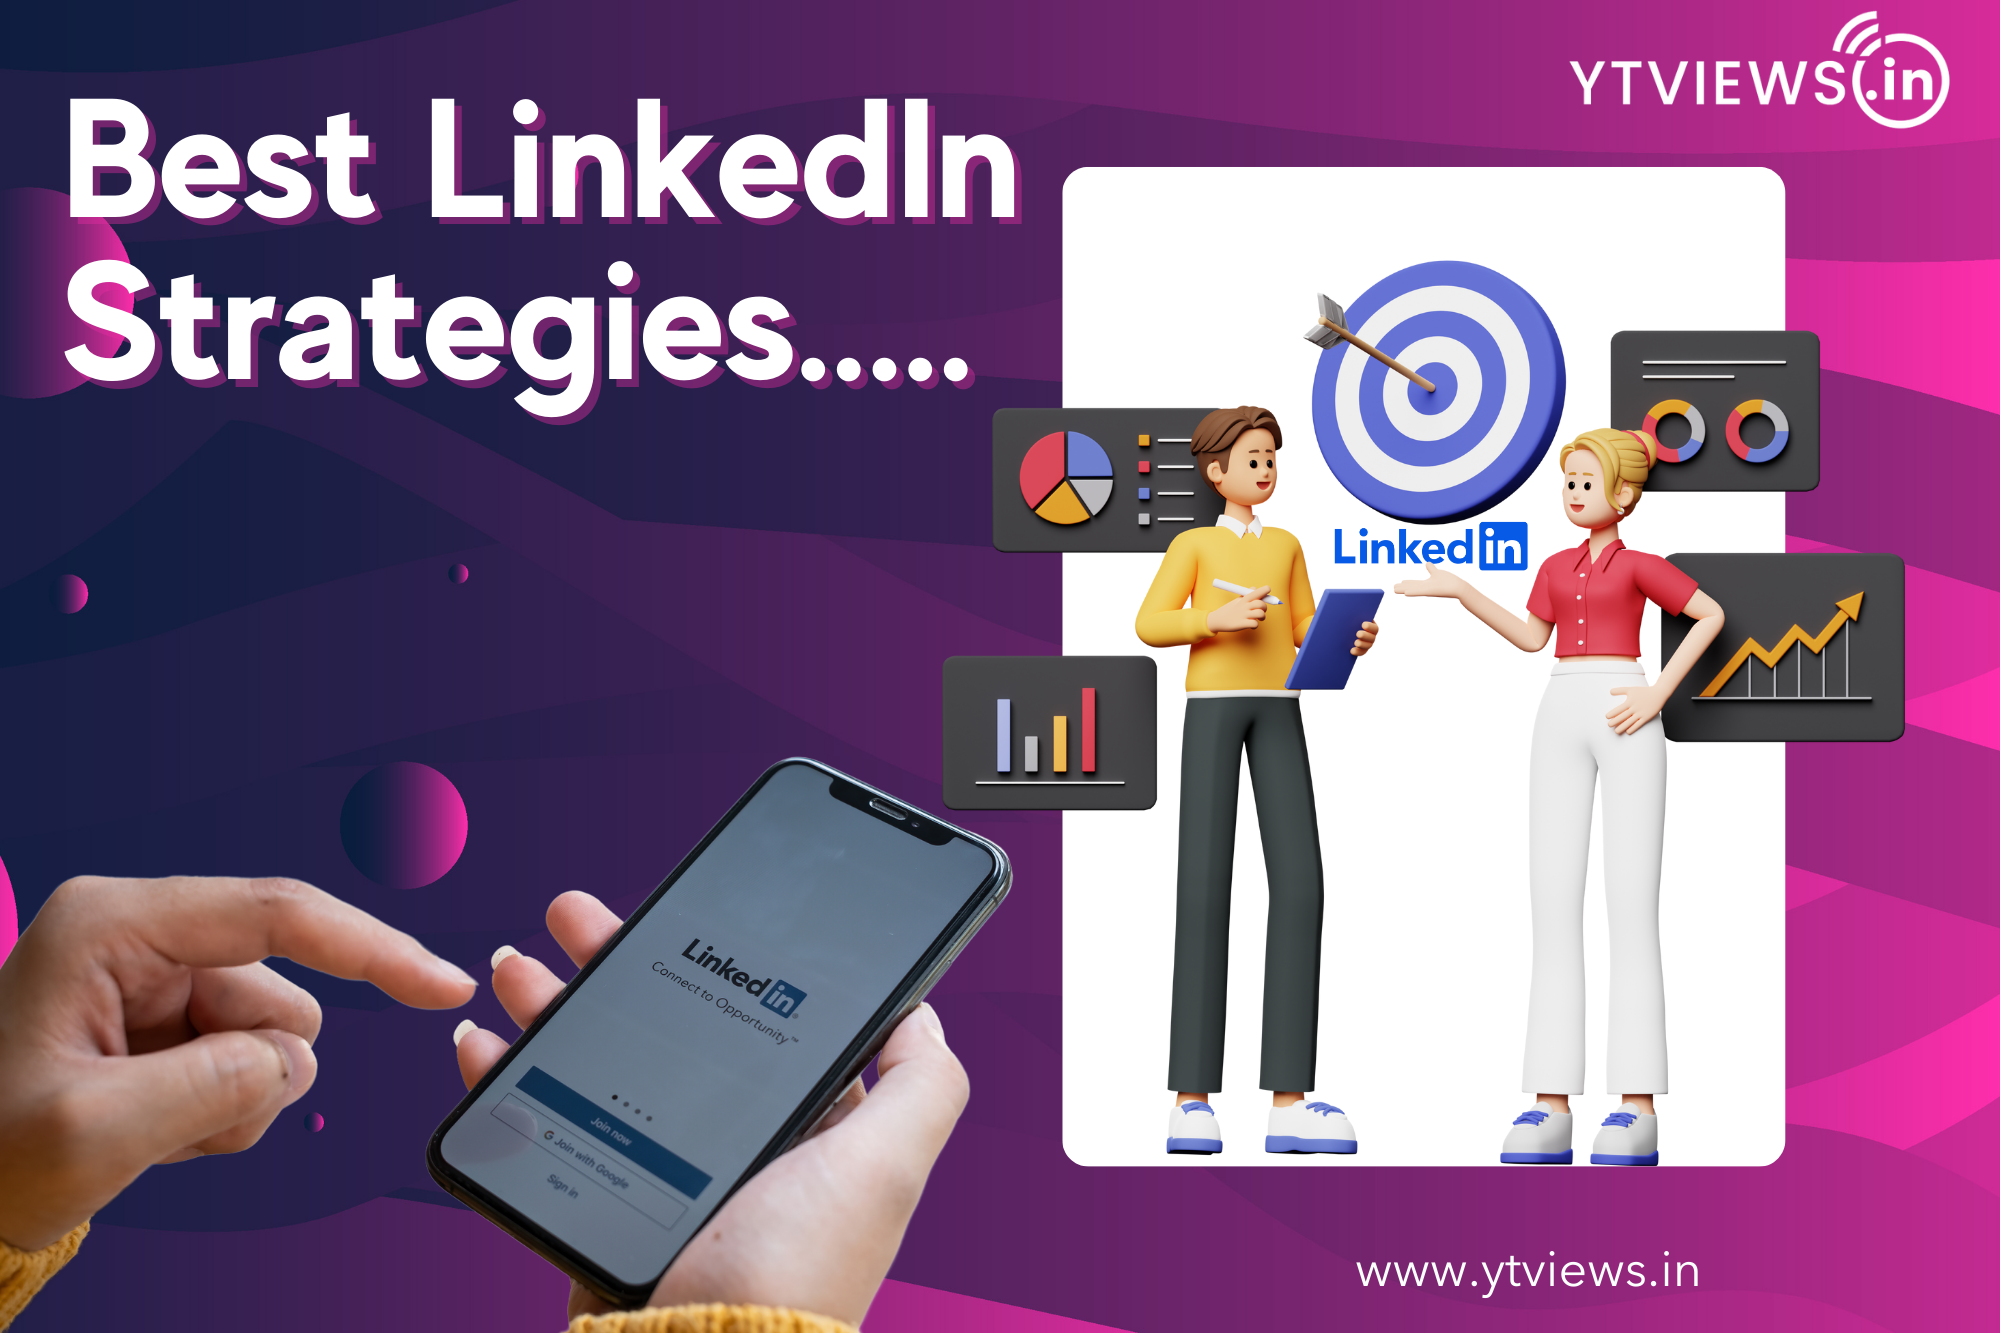 What are the best strategies for creating effective content on LinkedIn?